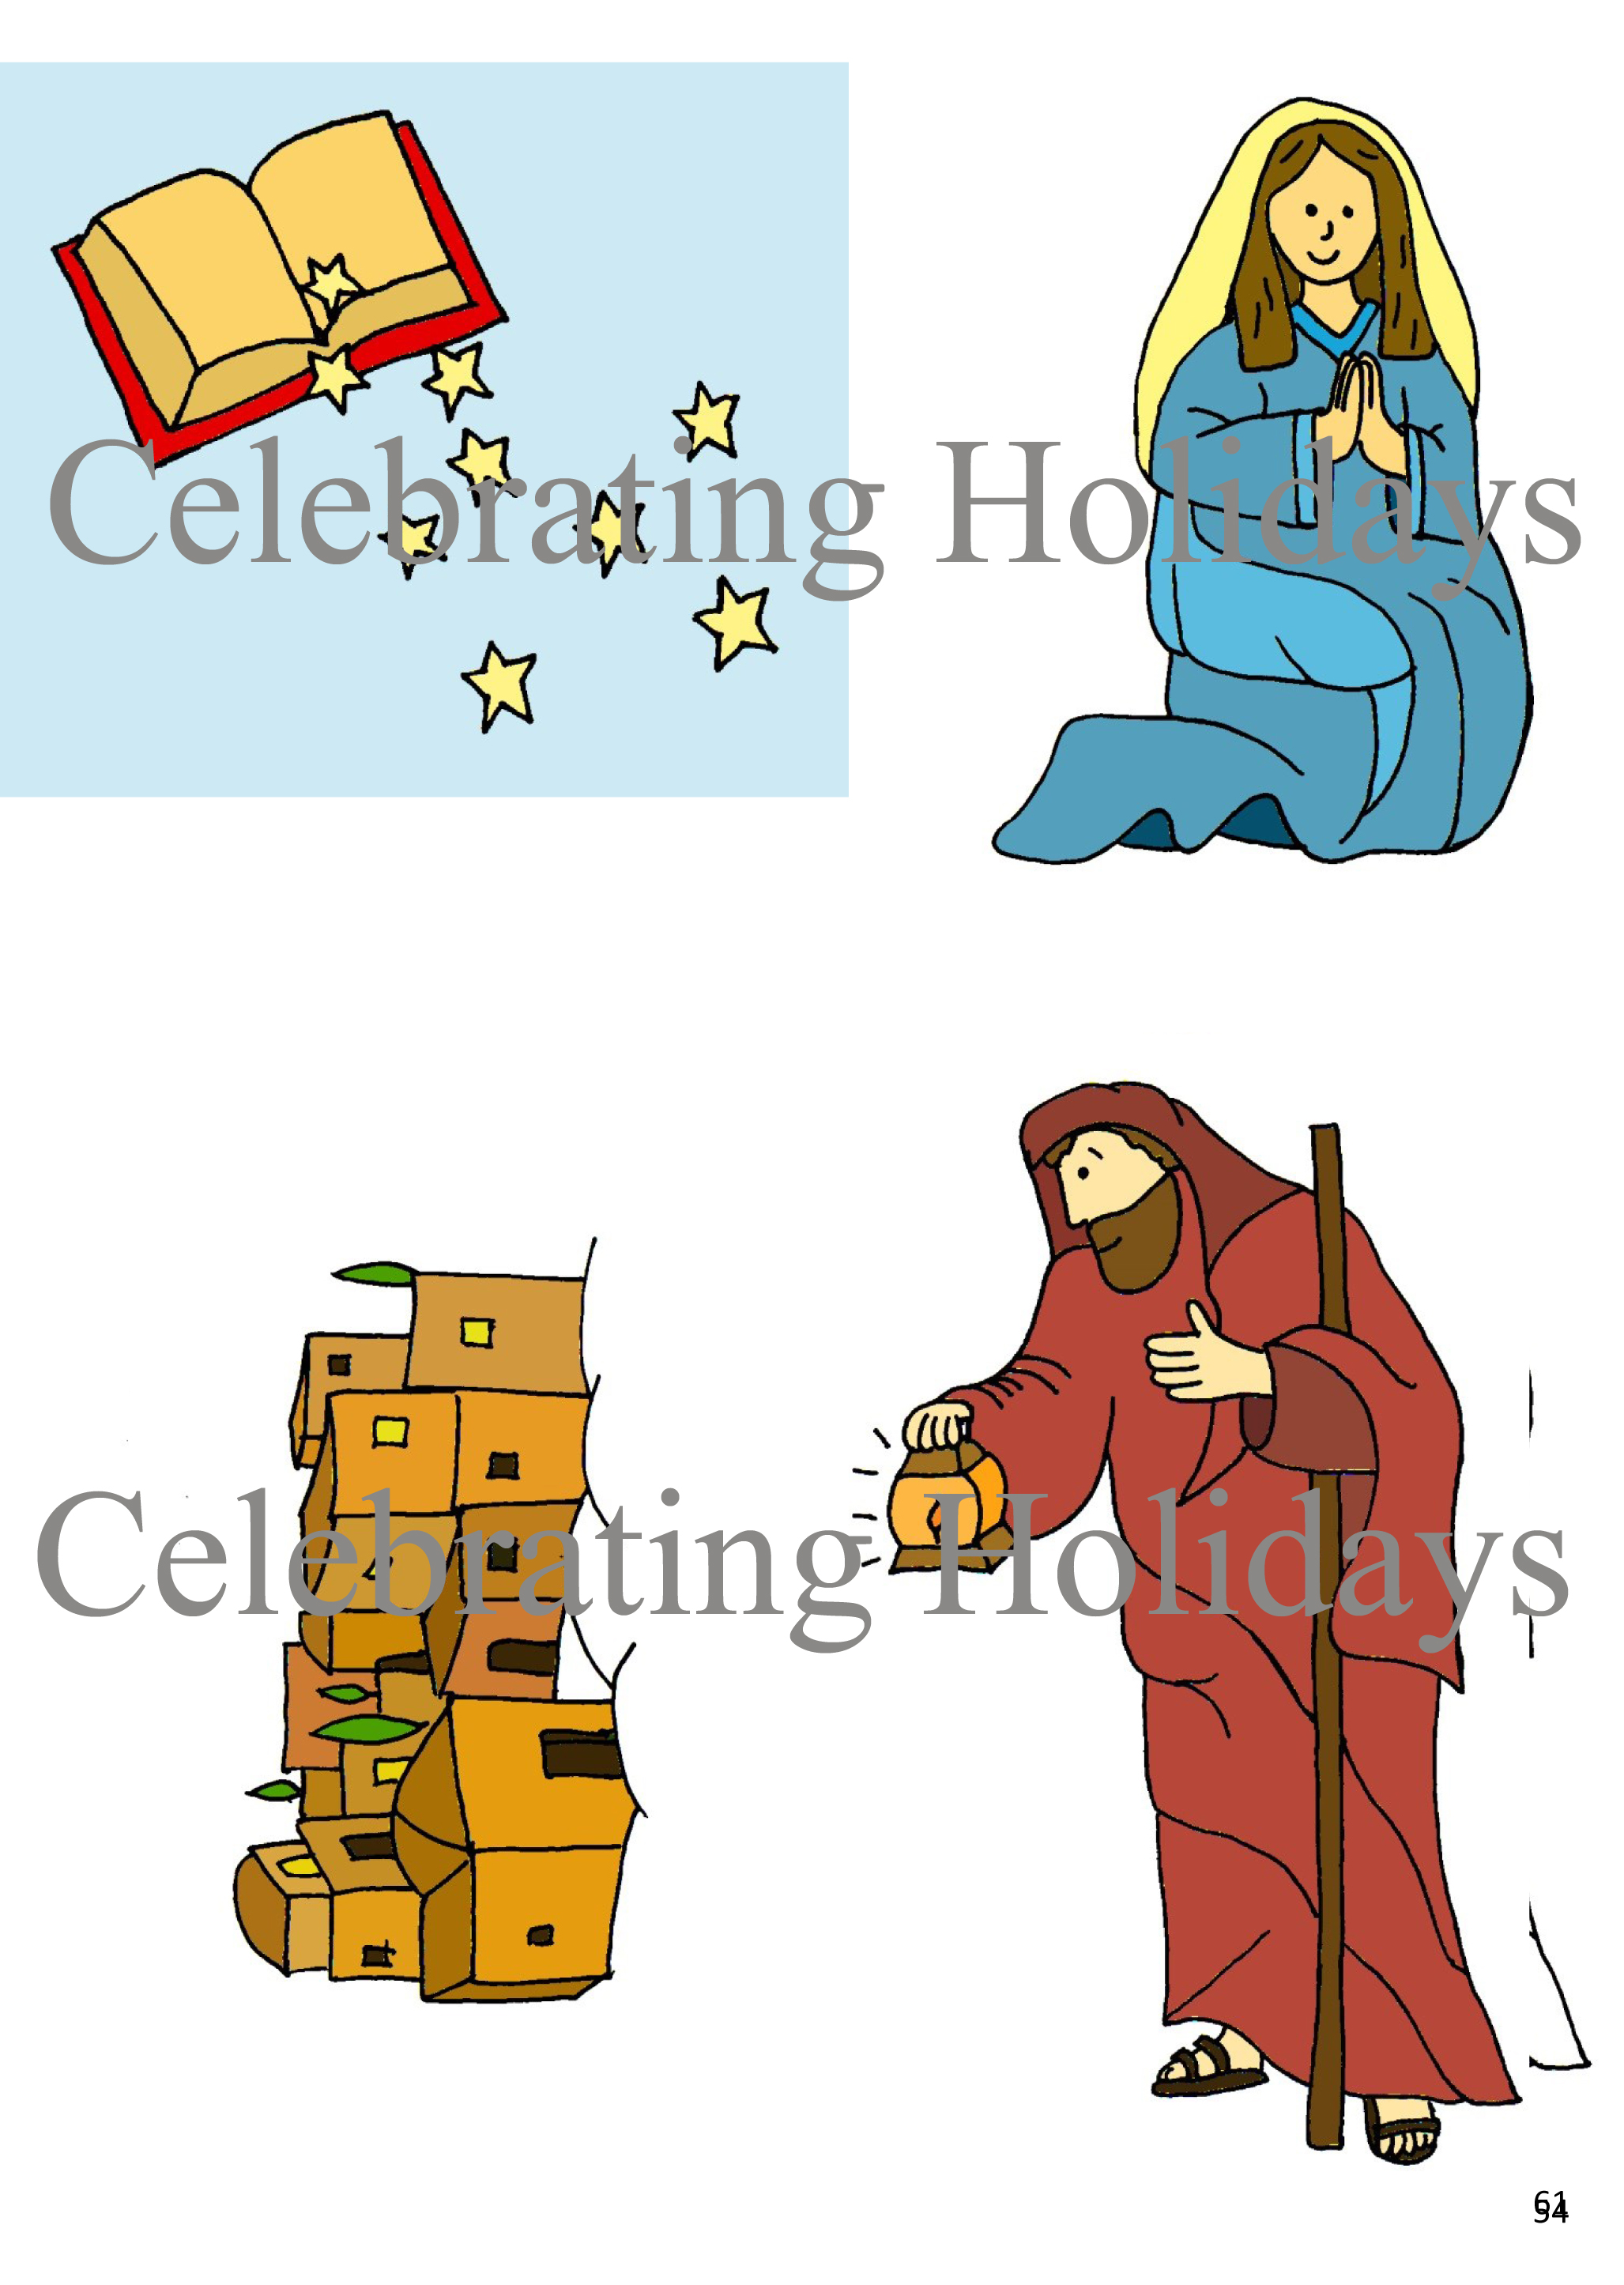 Sample Colored Nativity Images